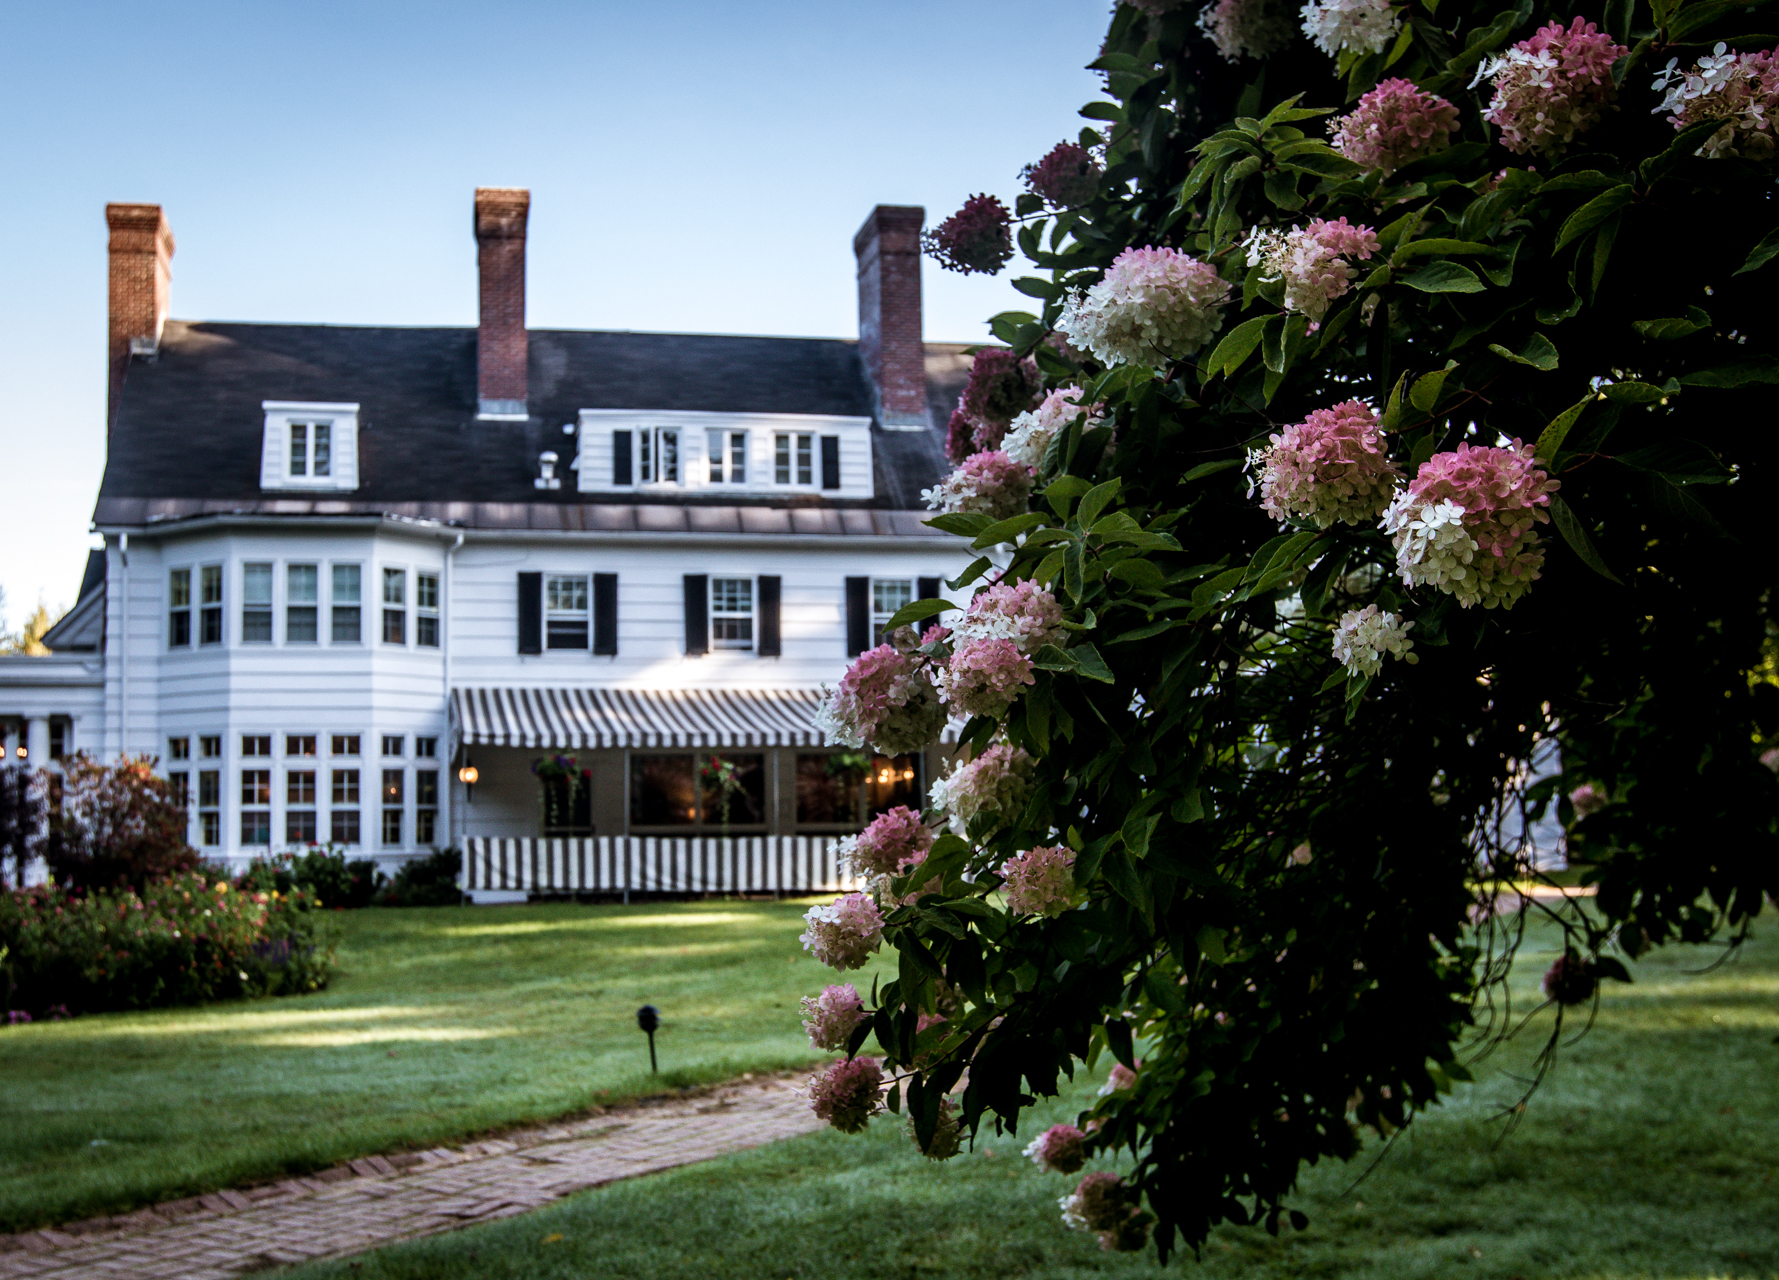 The Four Chimneys Inn in Bennington VT, reviewed by top New England travel blogger and photographer, Shannon Shipman. 